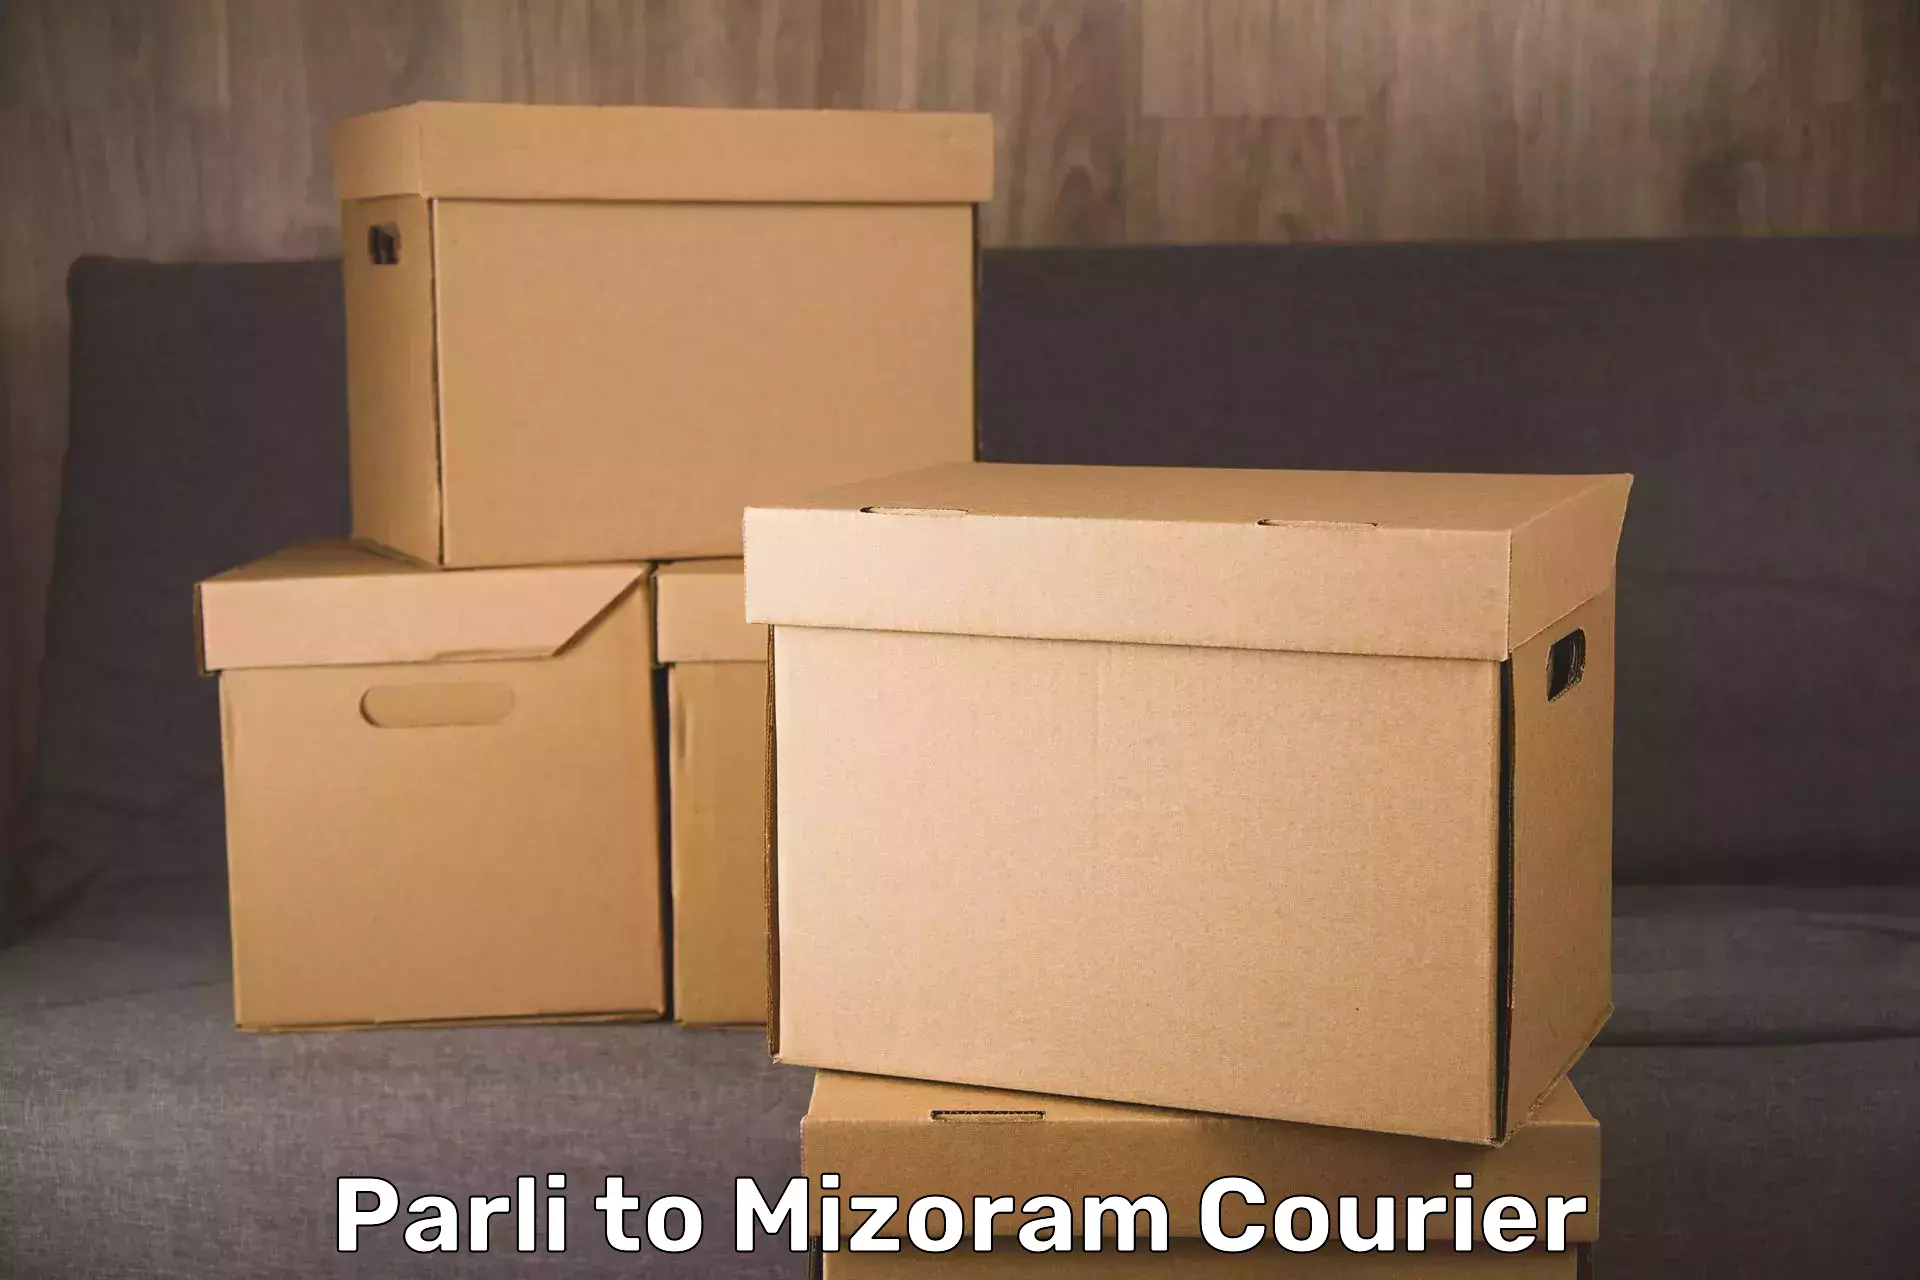 Luggage delivery system Parli to Mizoram